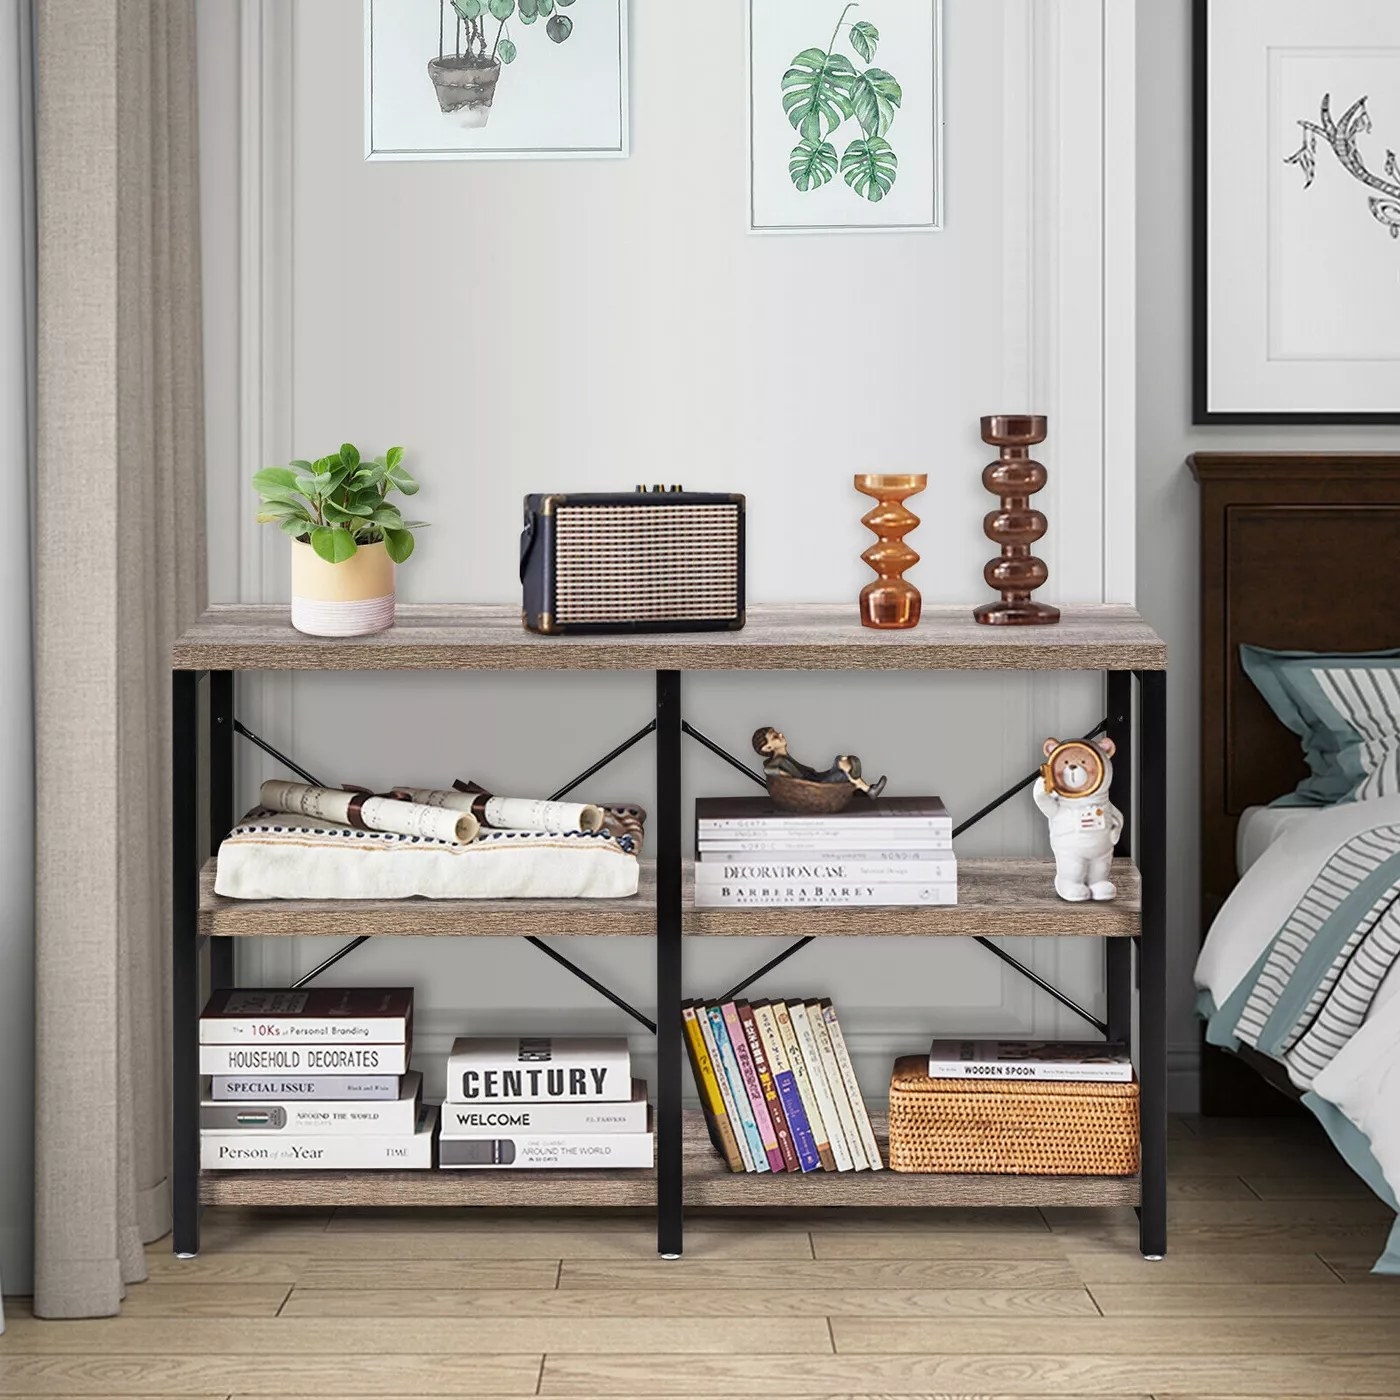 The gray oak shelves with a metal frame